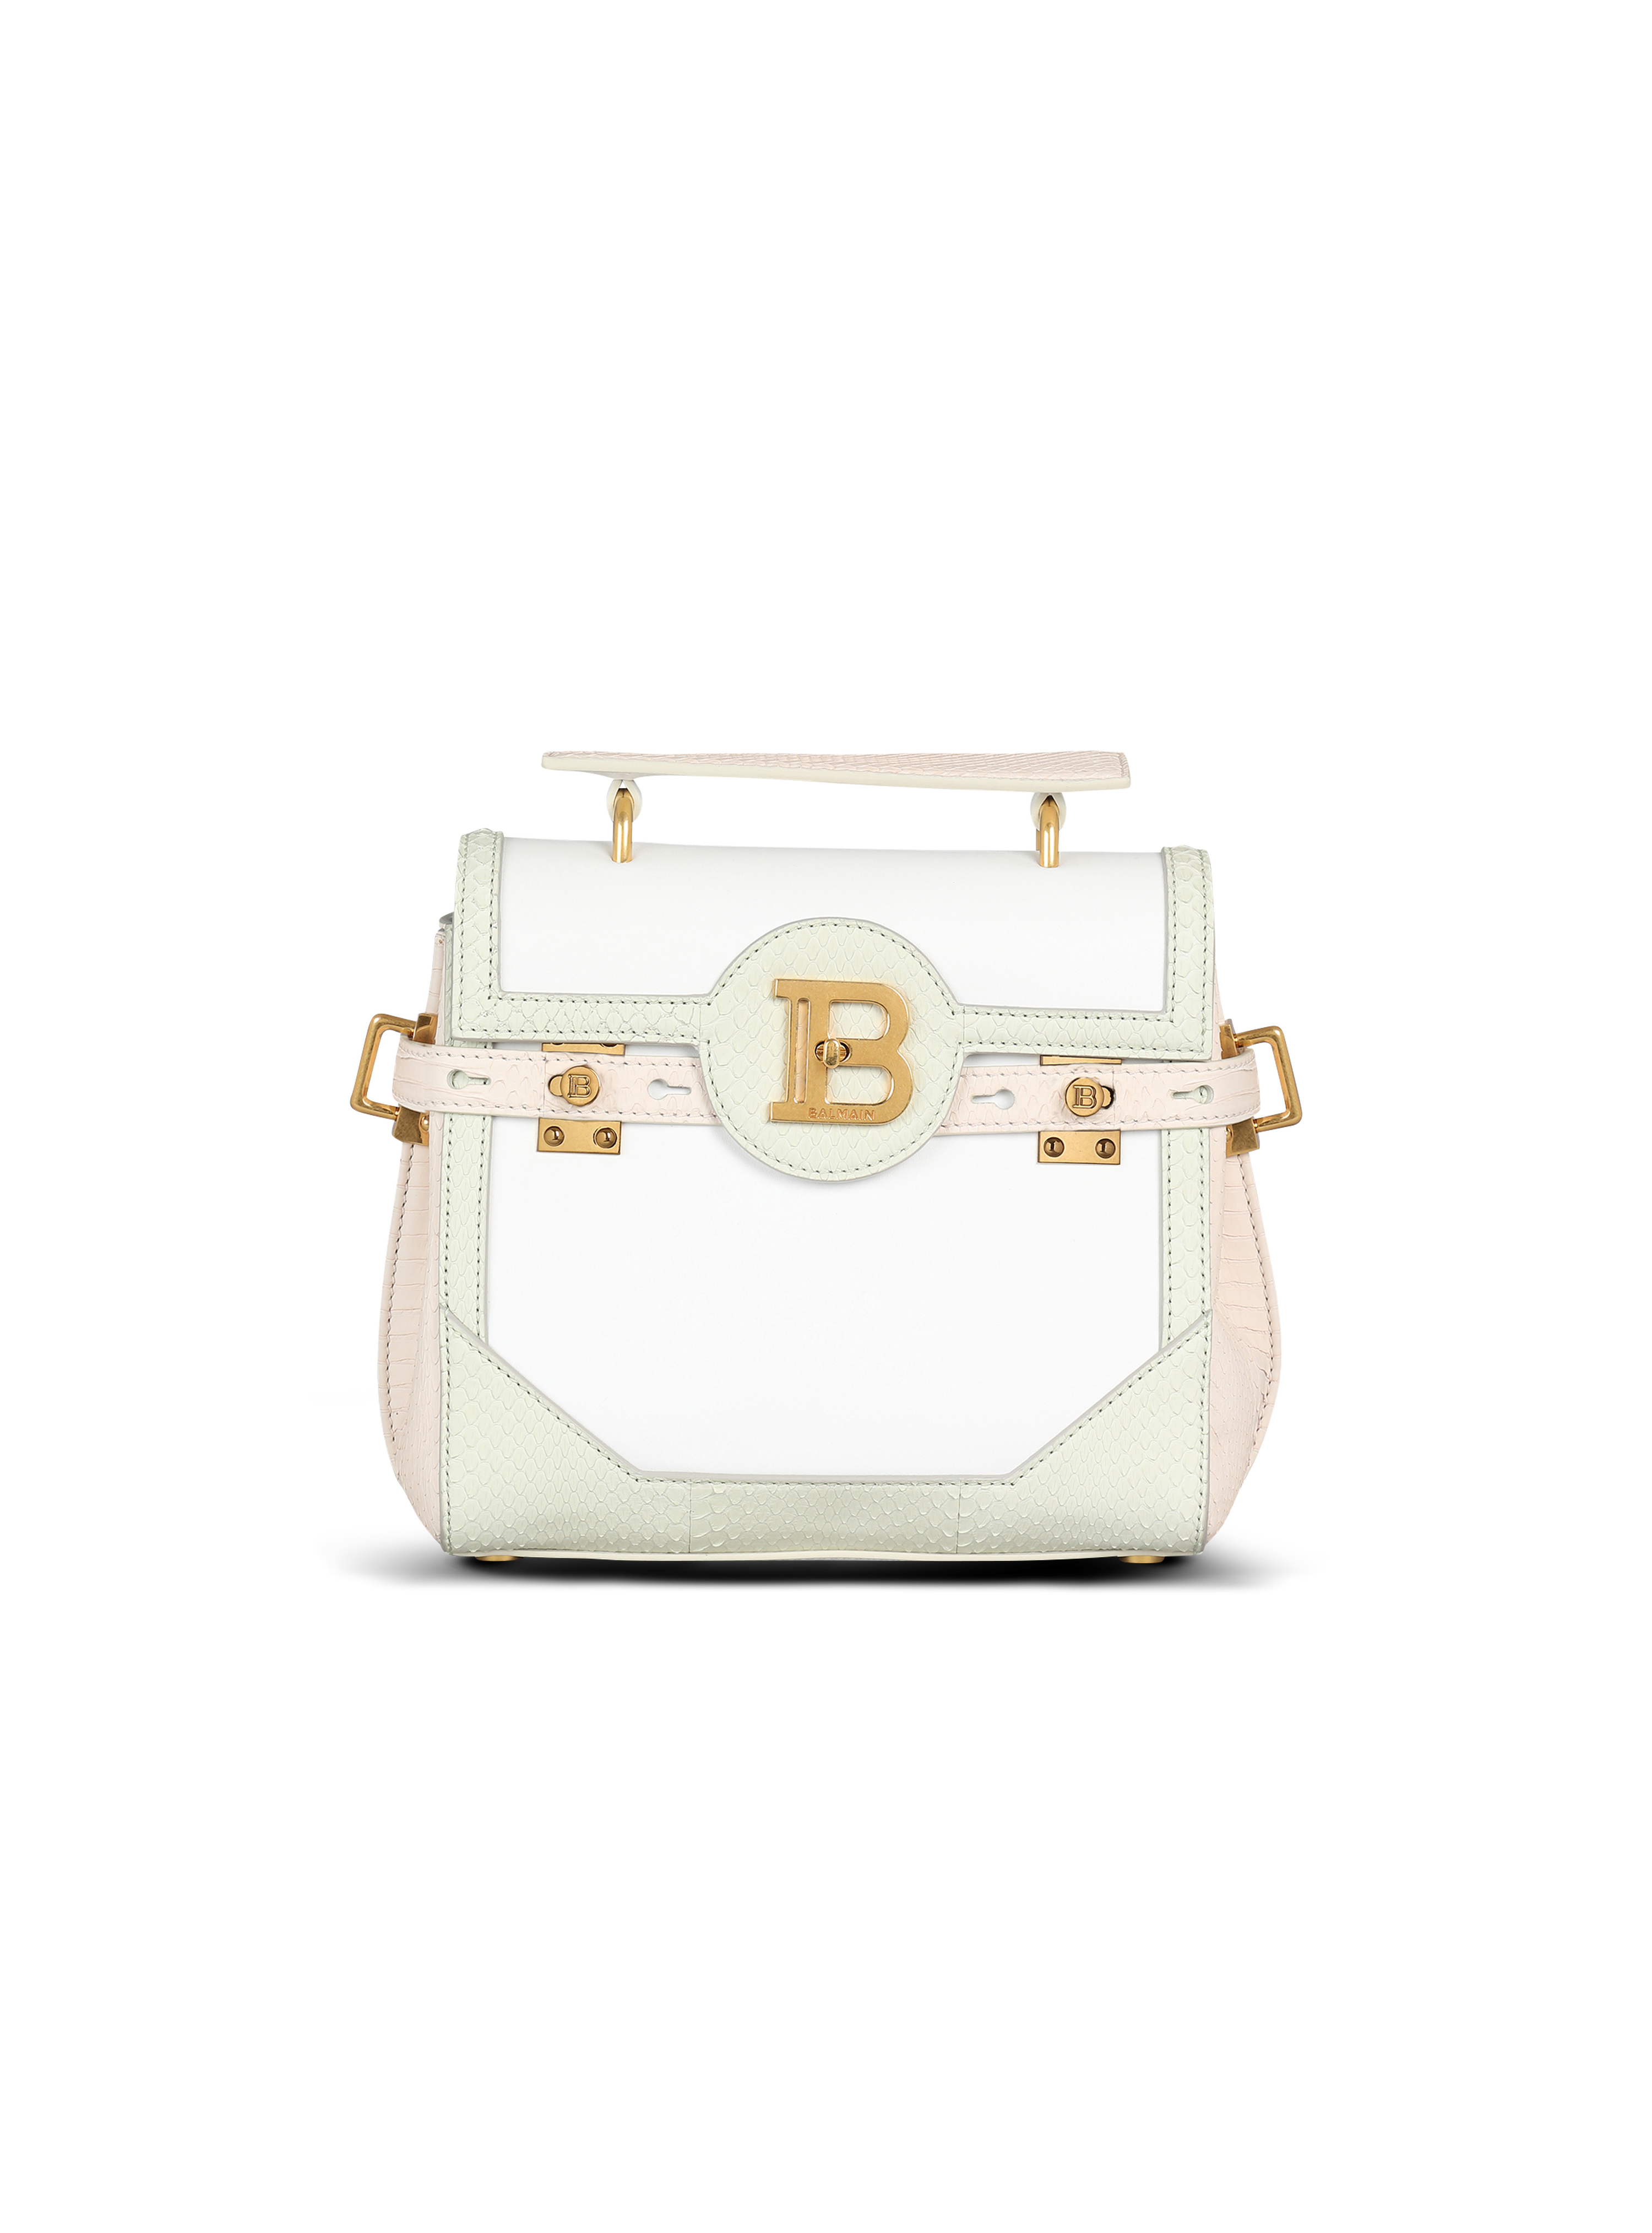 B-Buzz 23 bag in leather and python leather, multicolor